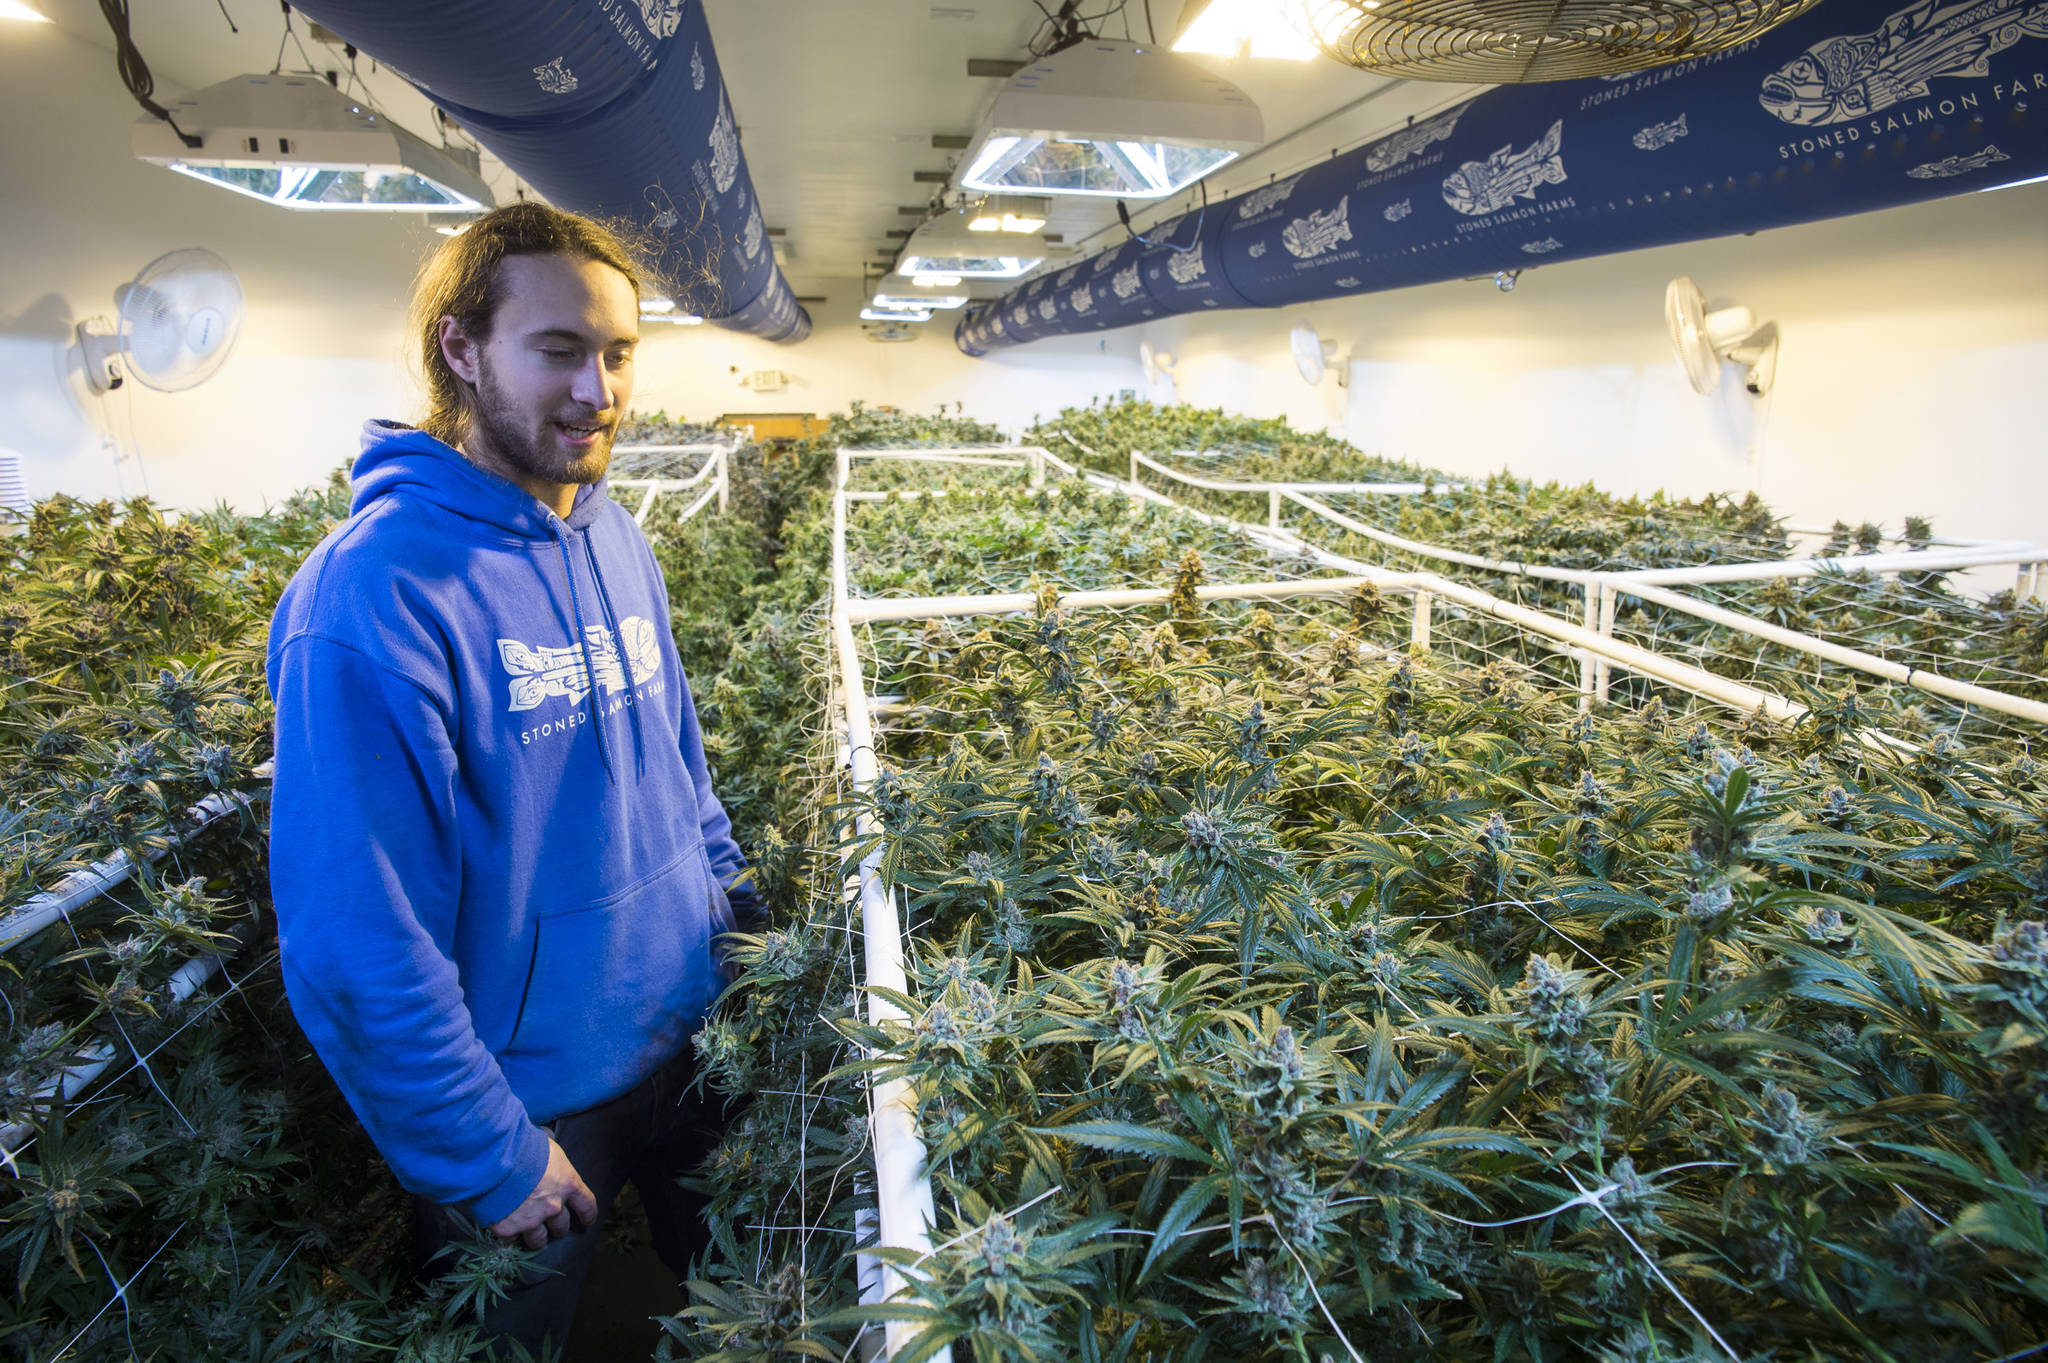 Simon Greer, a teammate at Stoned Salmon Farms, looks over cannabis plants growing in one of their two nursery rooms in Juneau on Tuesday, Dec. 4, 2018. (Michael Penn | Juneau Empire)